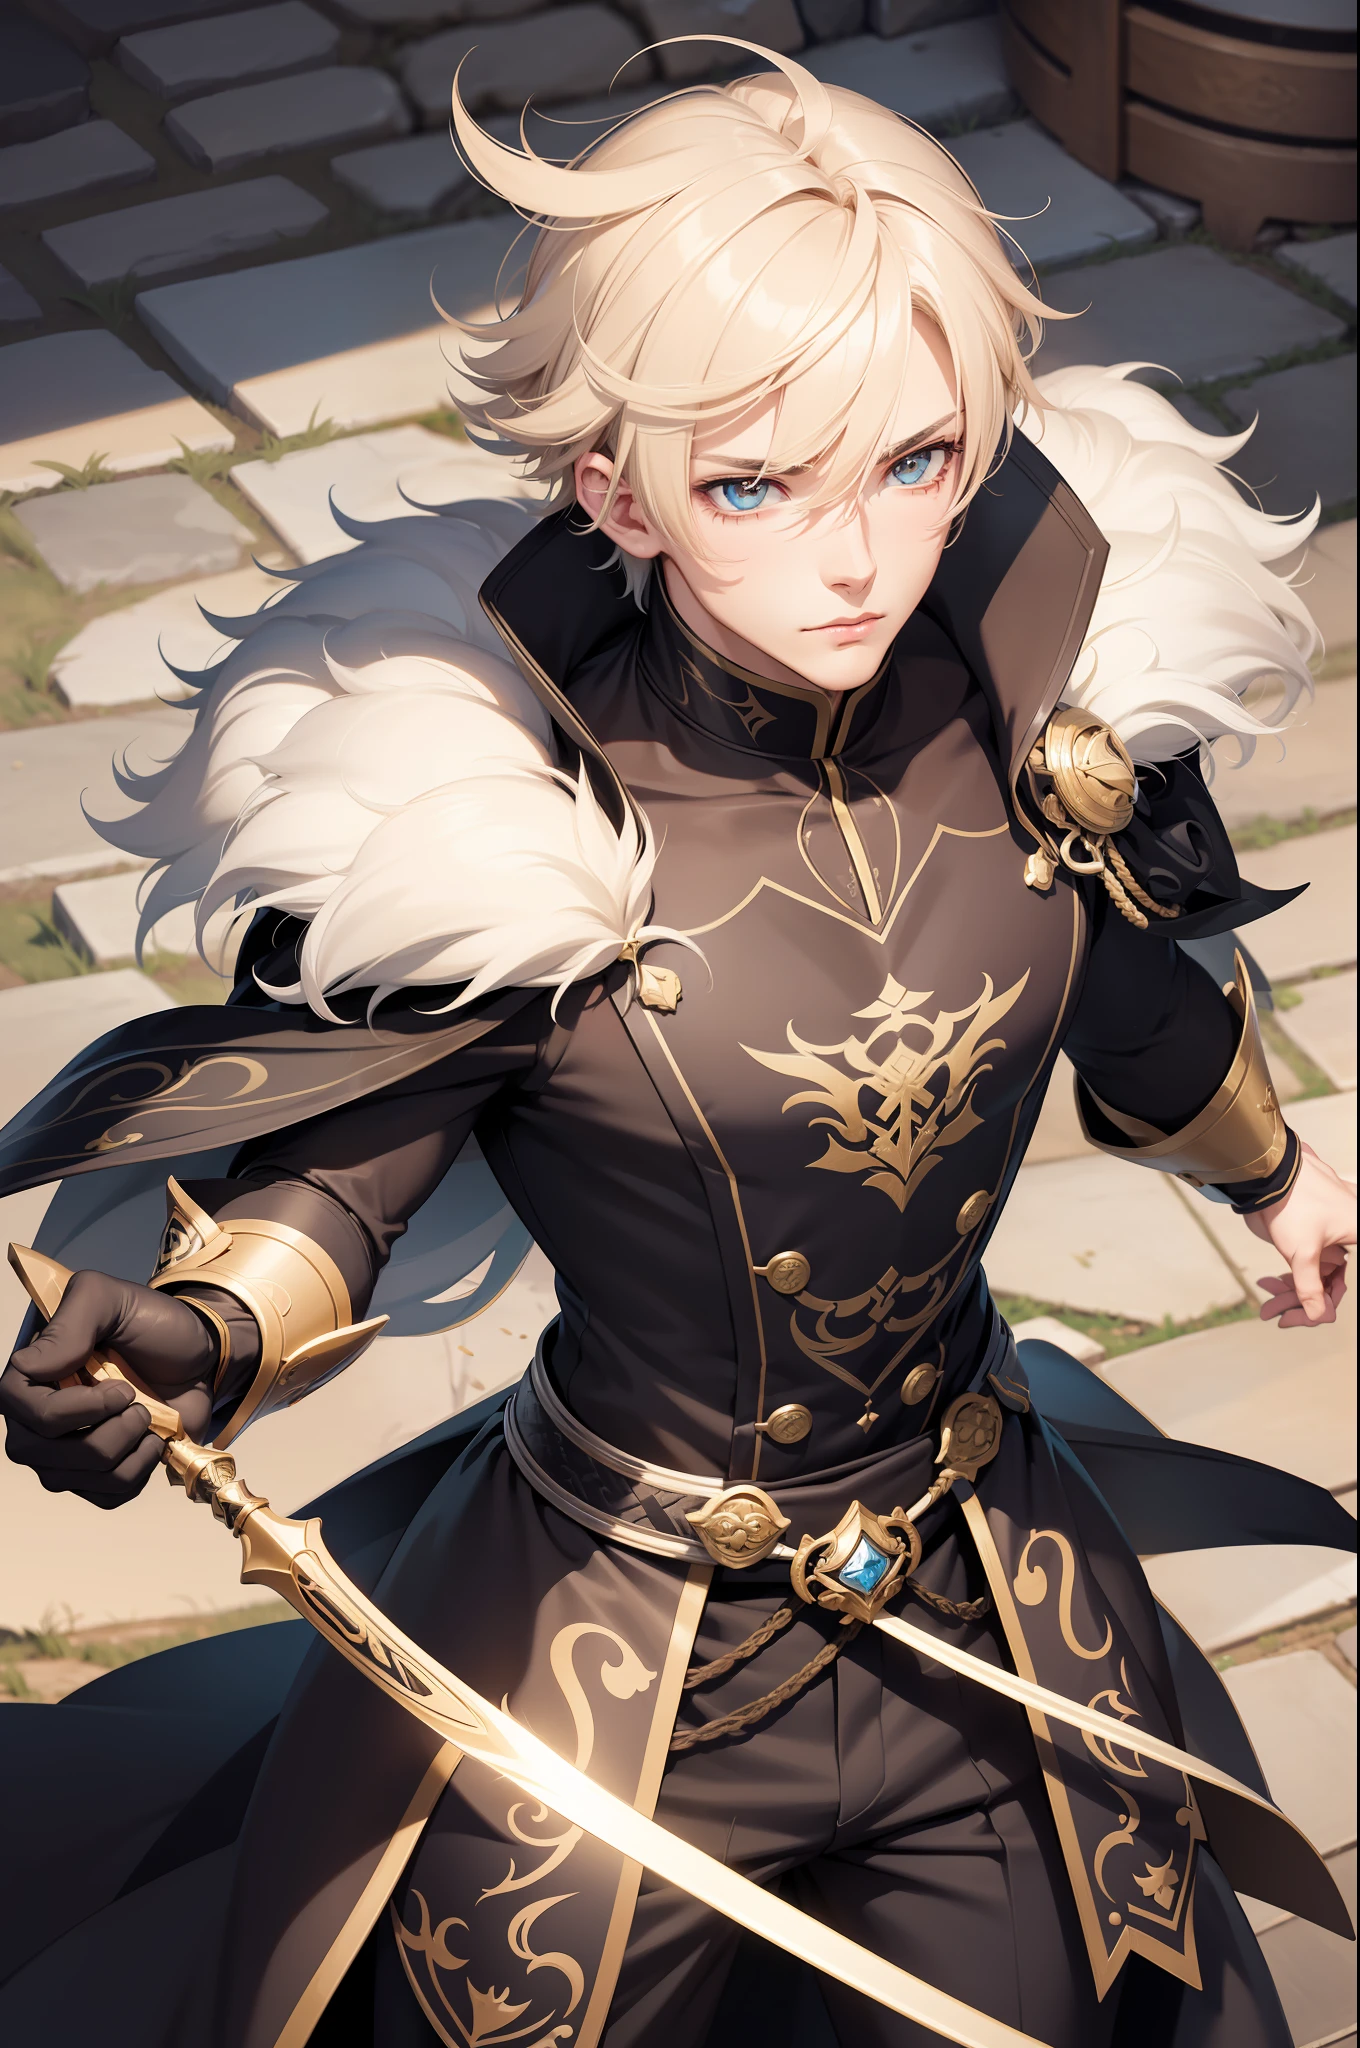 anime boy, (masculine),a close up of a person in a costume on a screen, Personagem Genshin Impact, Keqing de Genshin Impact, Genshin, genshin impact style, zhongli, Genshin Impact, 8 k character details, the golden cat armor knight, wearing golden cat armor, videogame Genshin impact, main character, um paladino masculine humano, new character